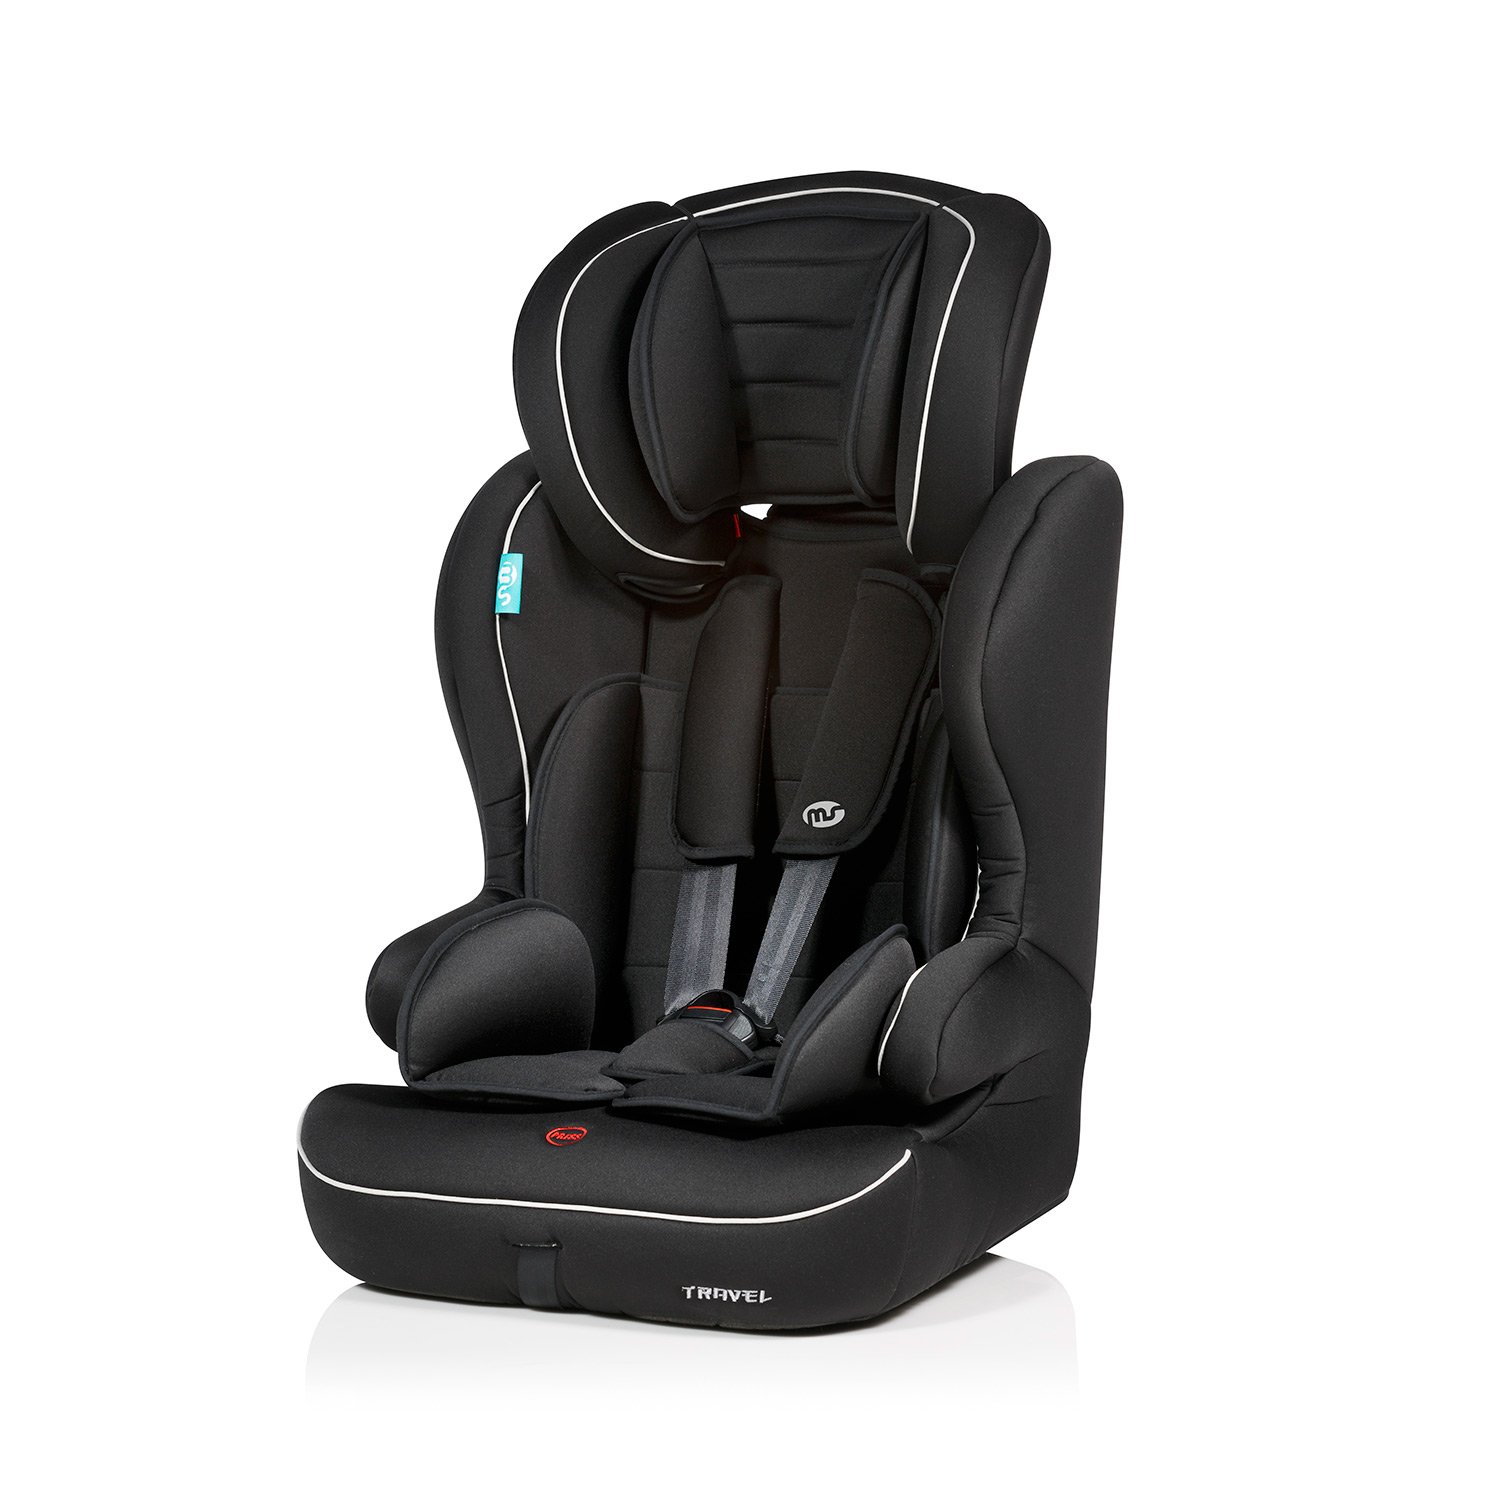 Innovaciones MS Innovations MS Travel Car Child Seat Group 1/2/3 (9-36 kg) 9 Meses – Black and Grey